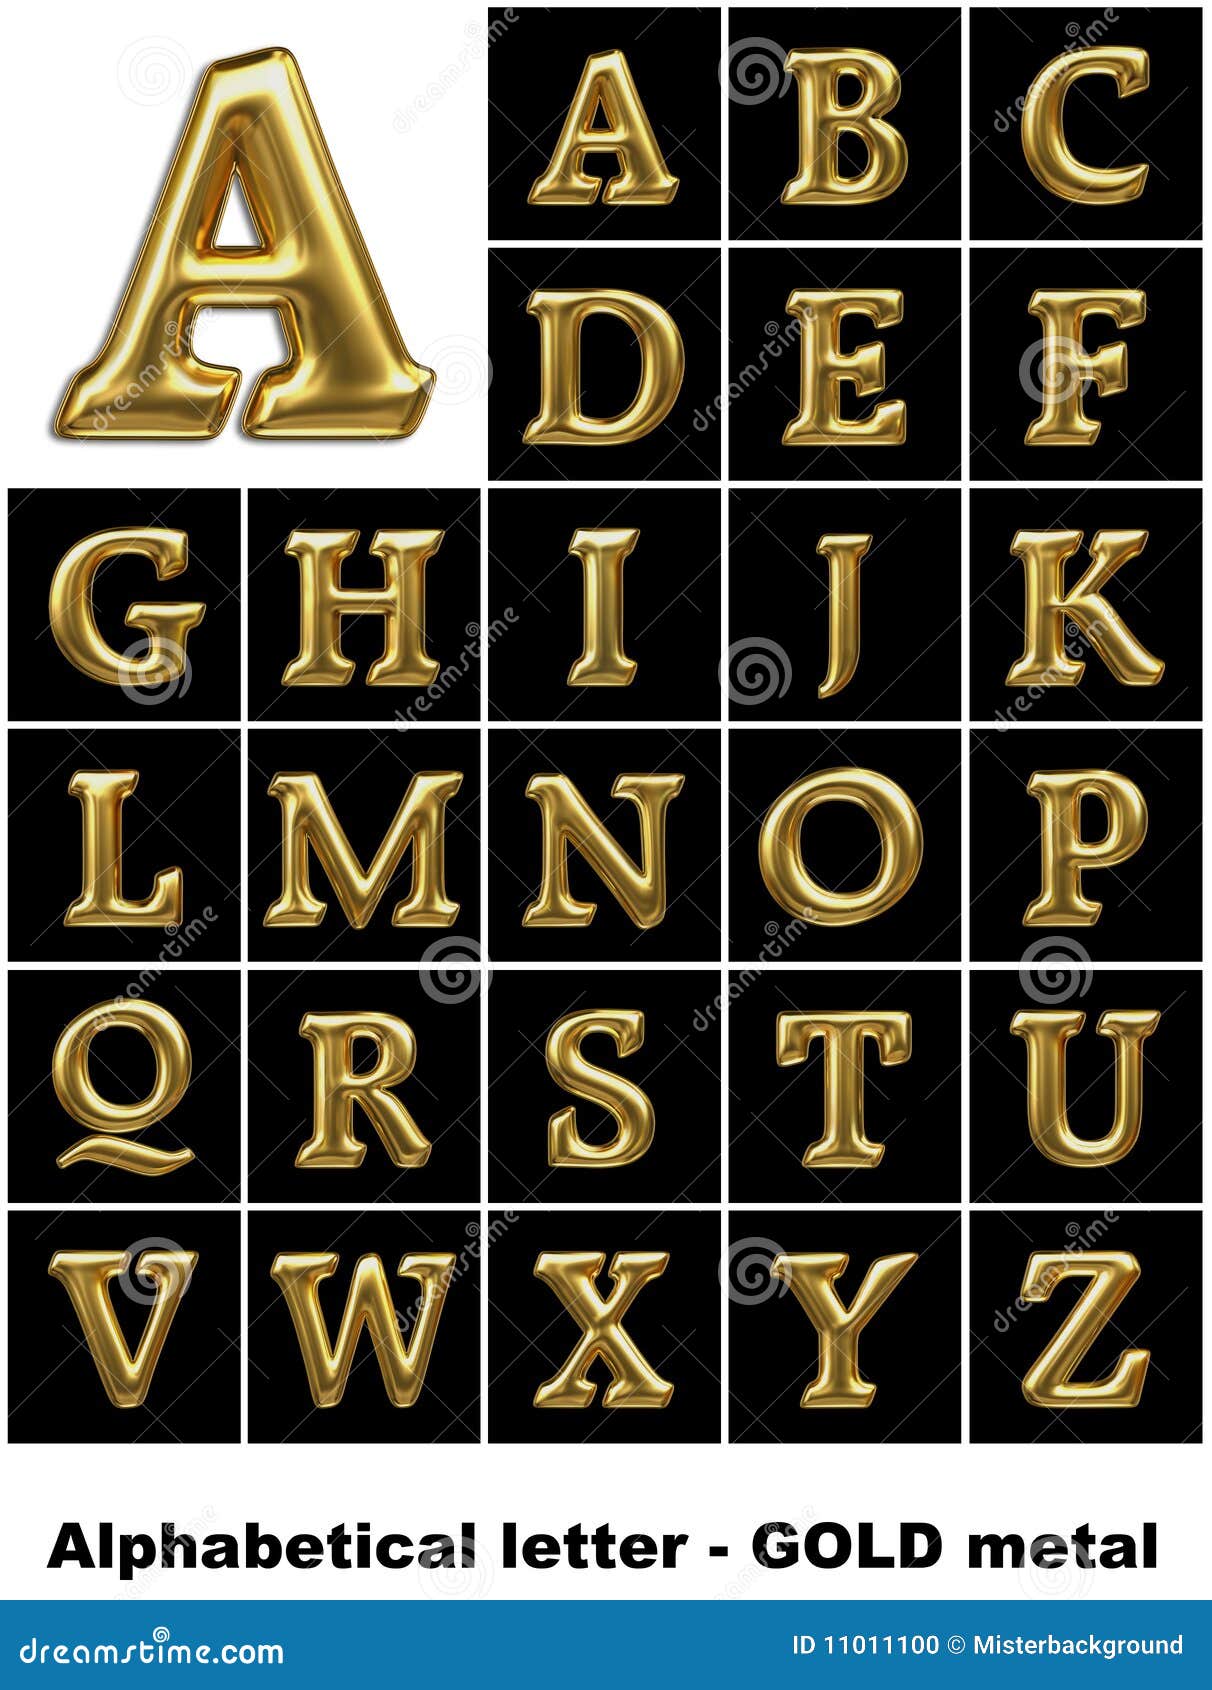 Premium Vector  Gold metallic alphabet letters and numbers